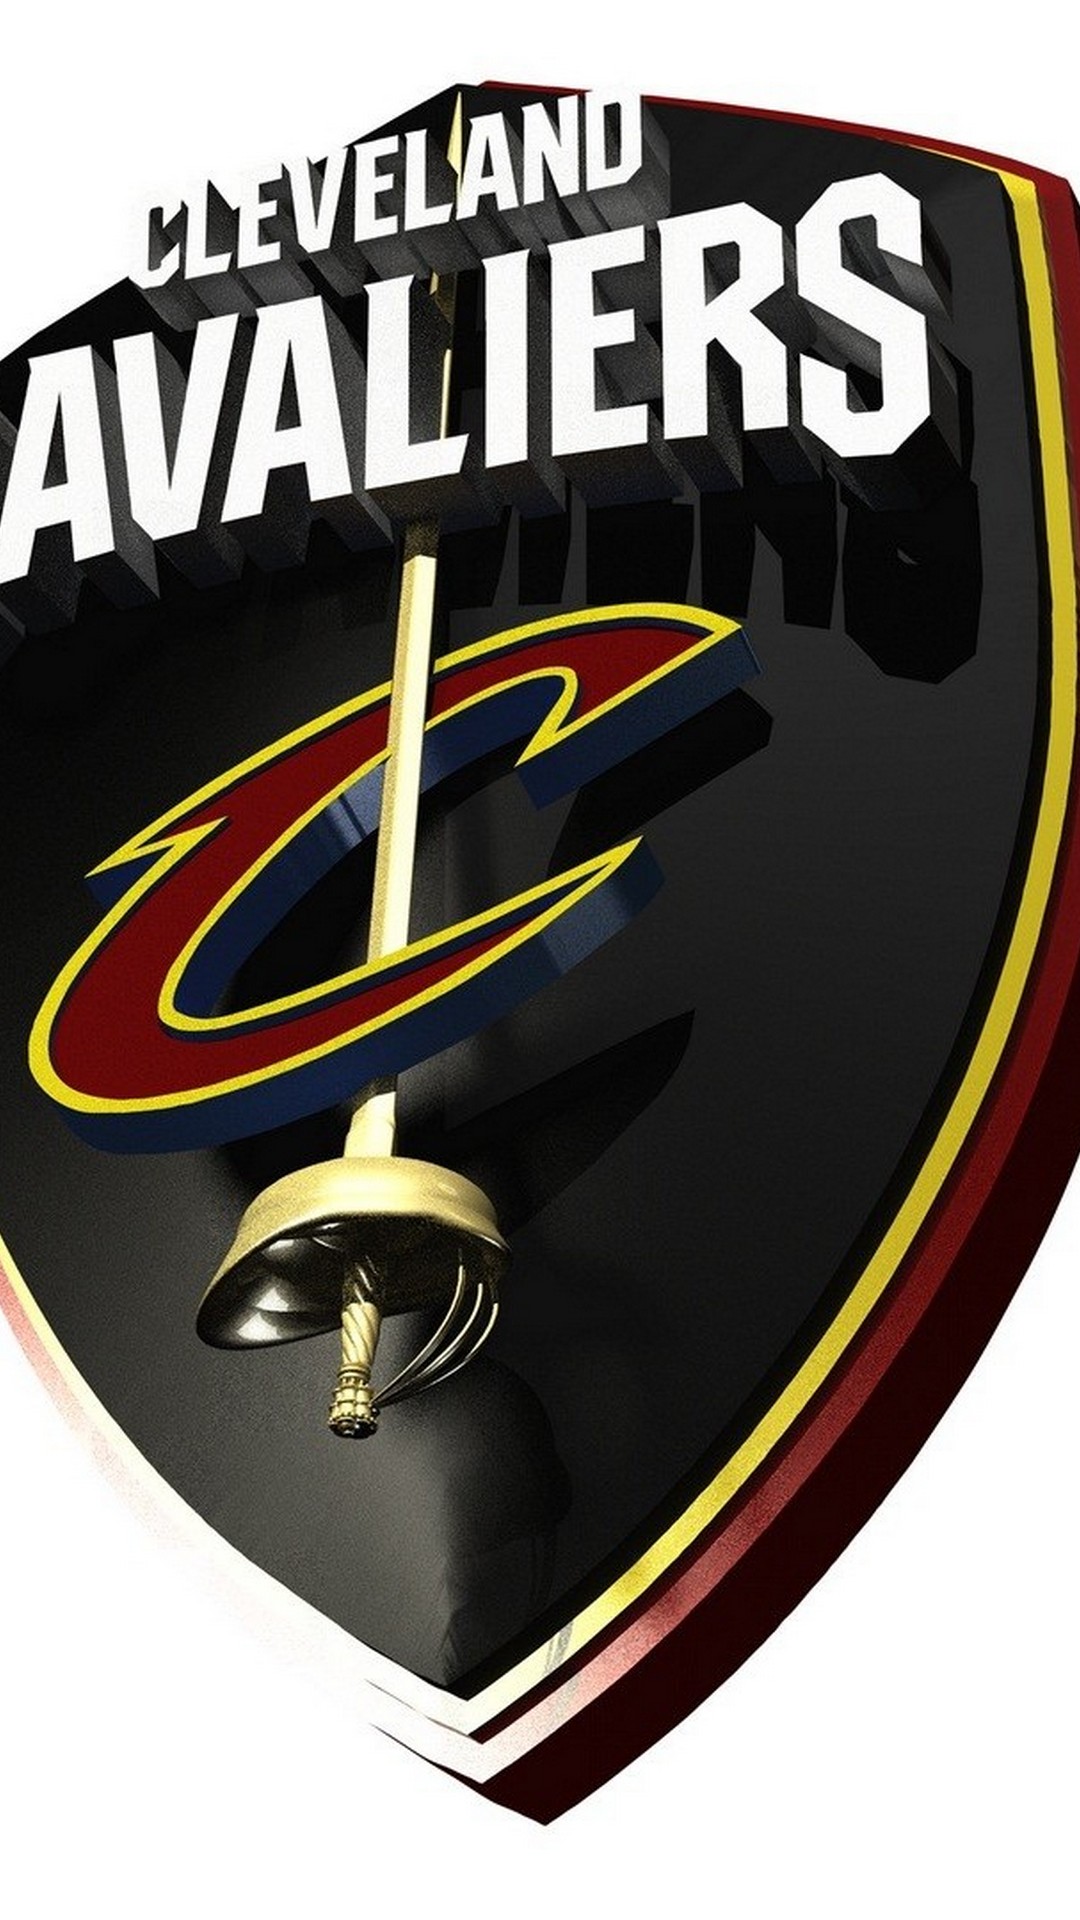 Cavs HD Wallpaper For iPhone 1080x1920